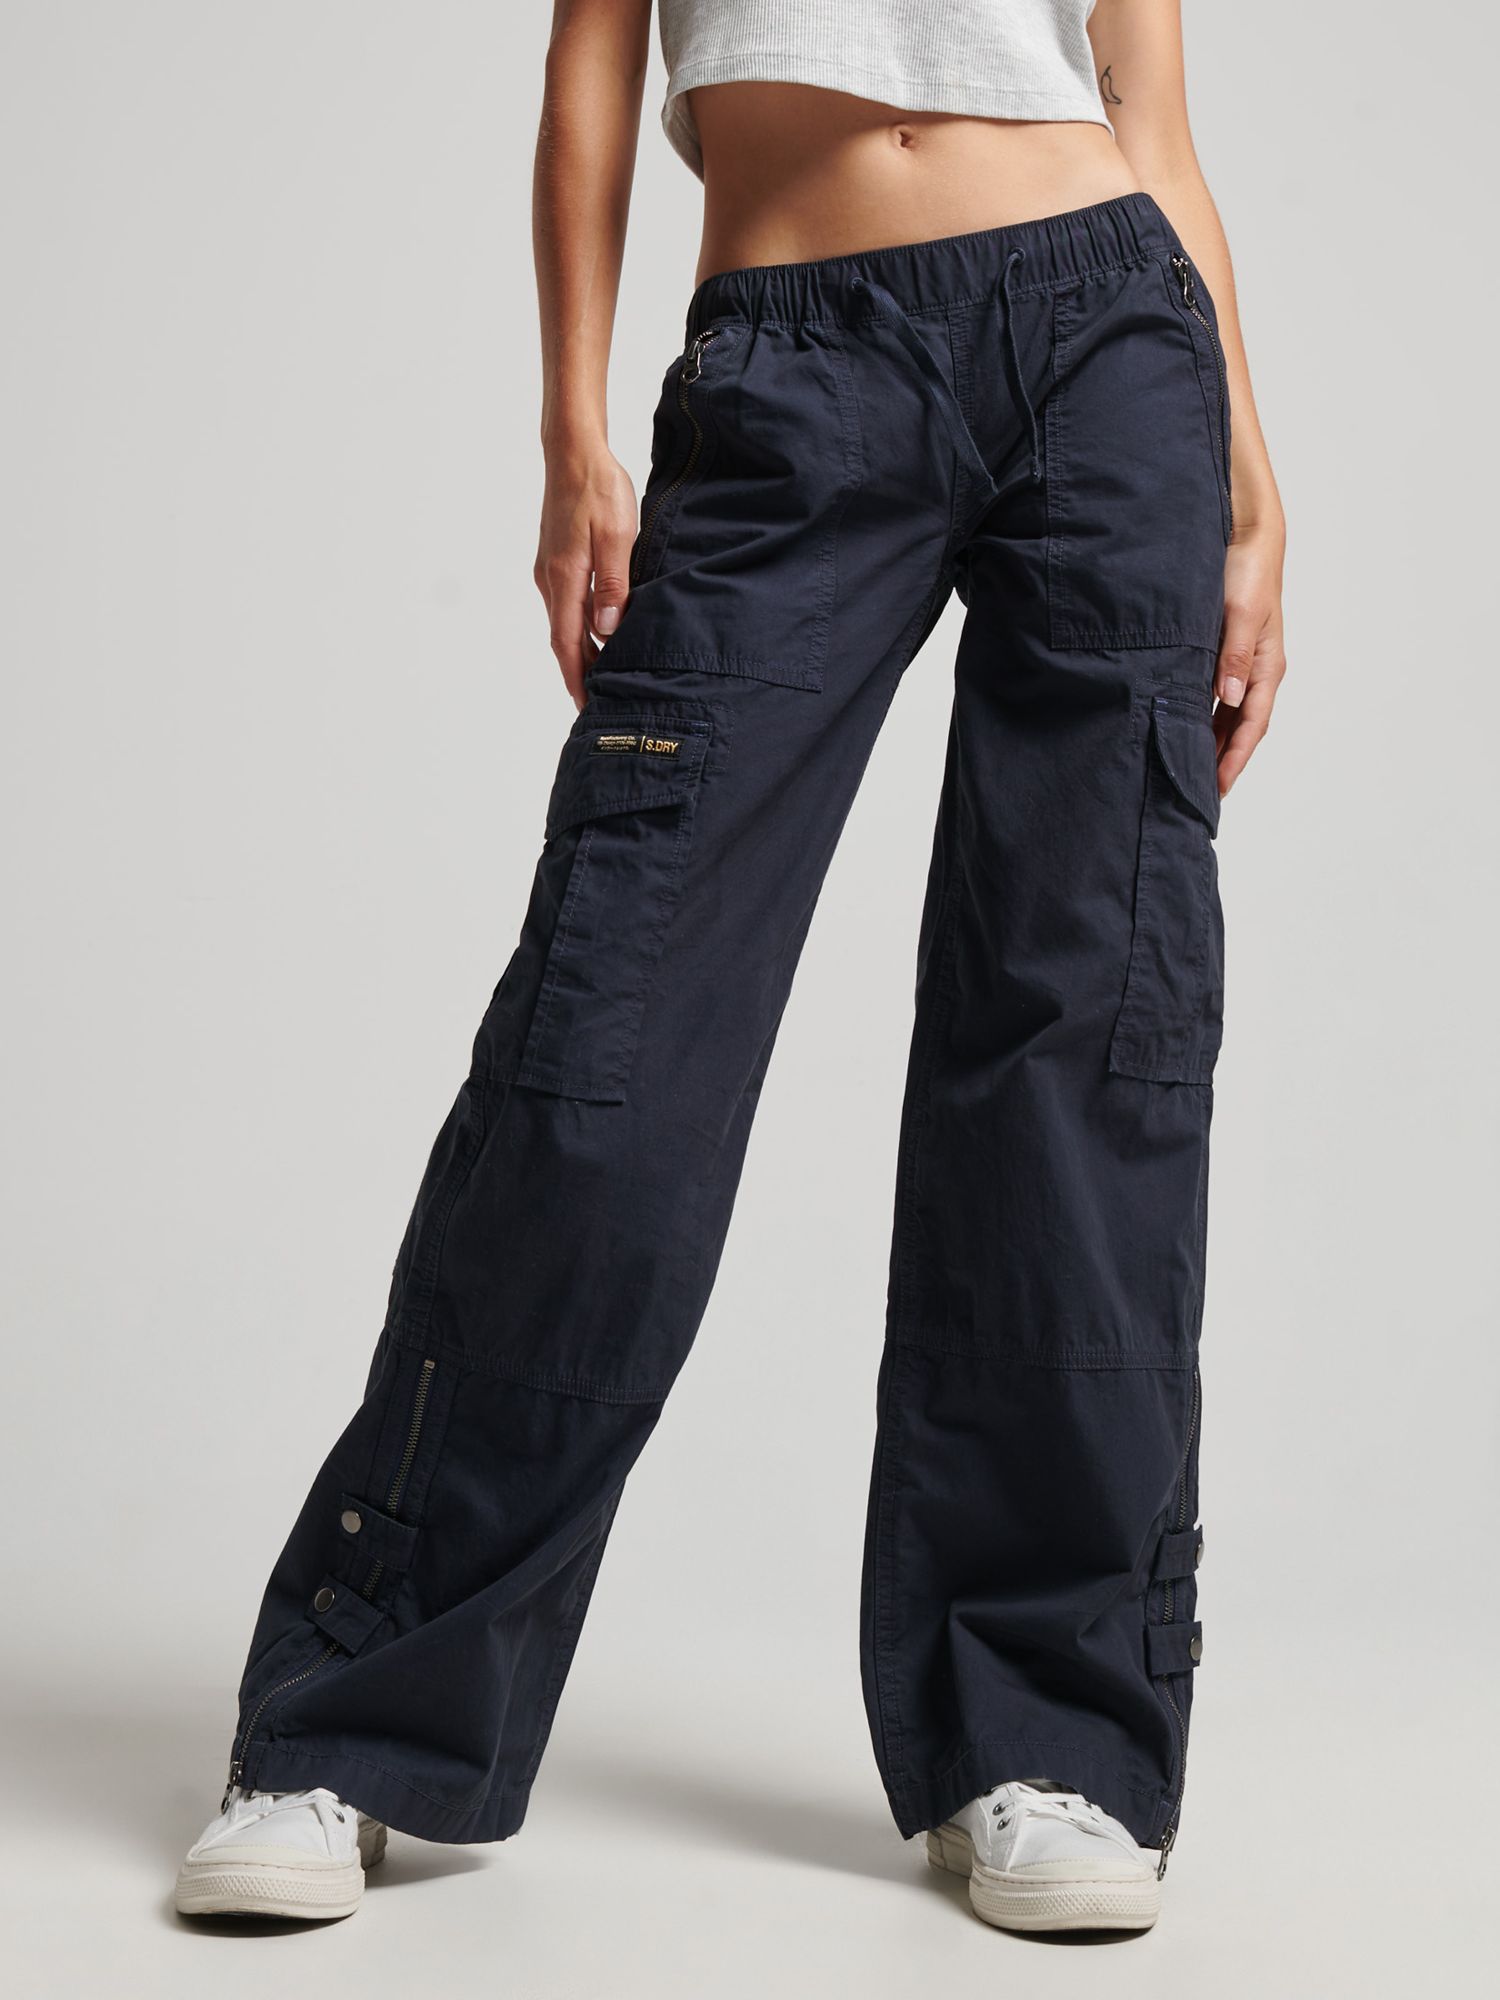 Silver Jeans Co.® Cargo Mid Rise Flare Pant